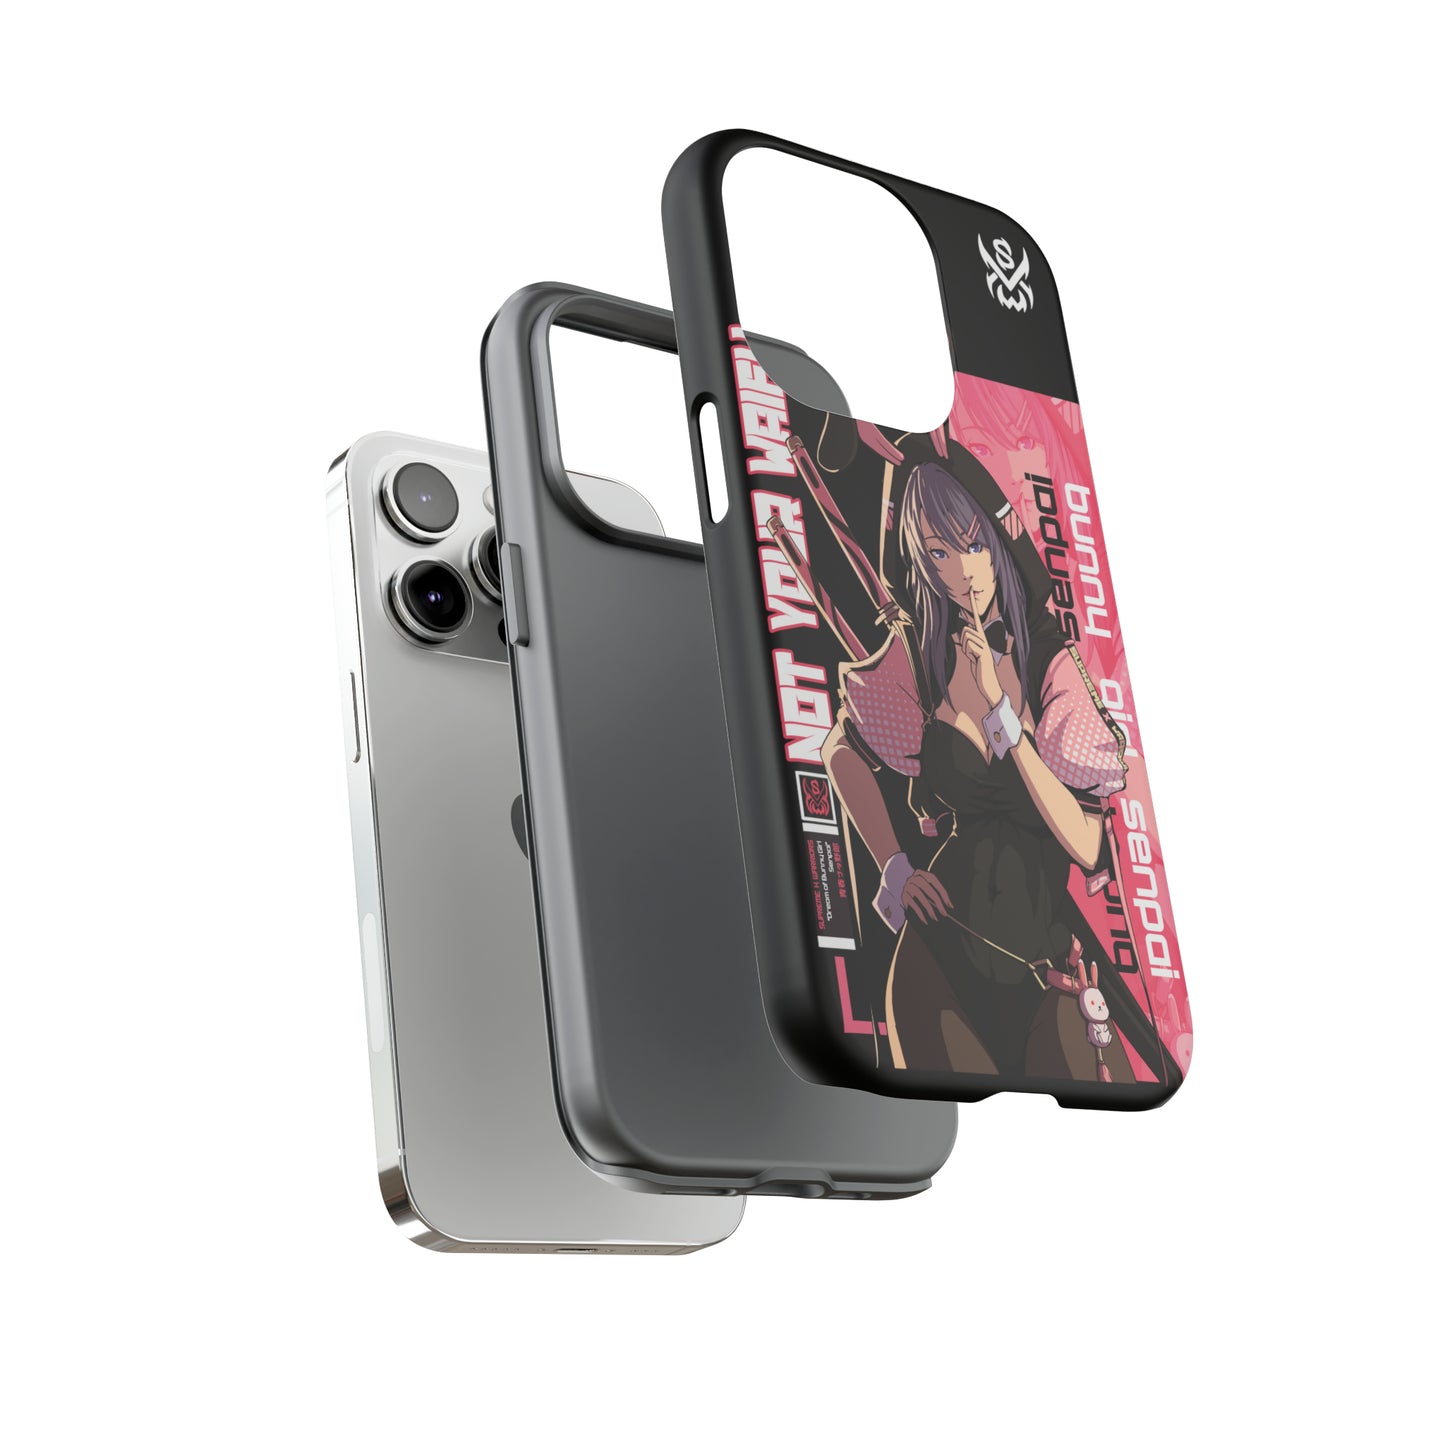 Bunny Girl / iPhone Case - LIMITED